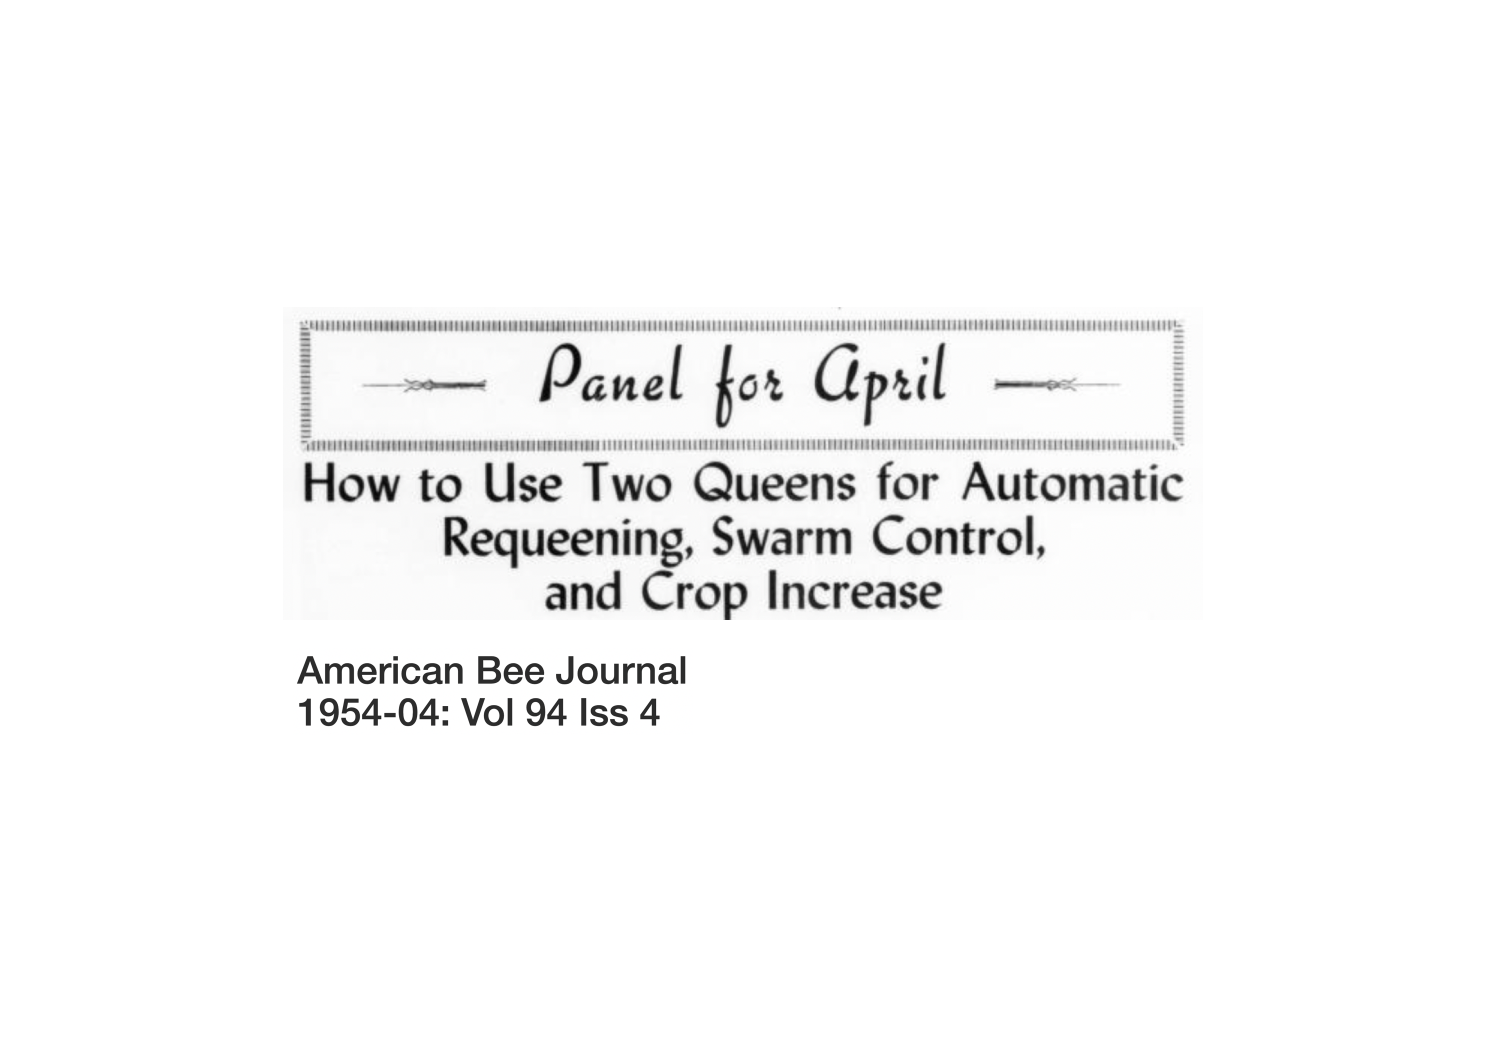 Panel for April 1952